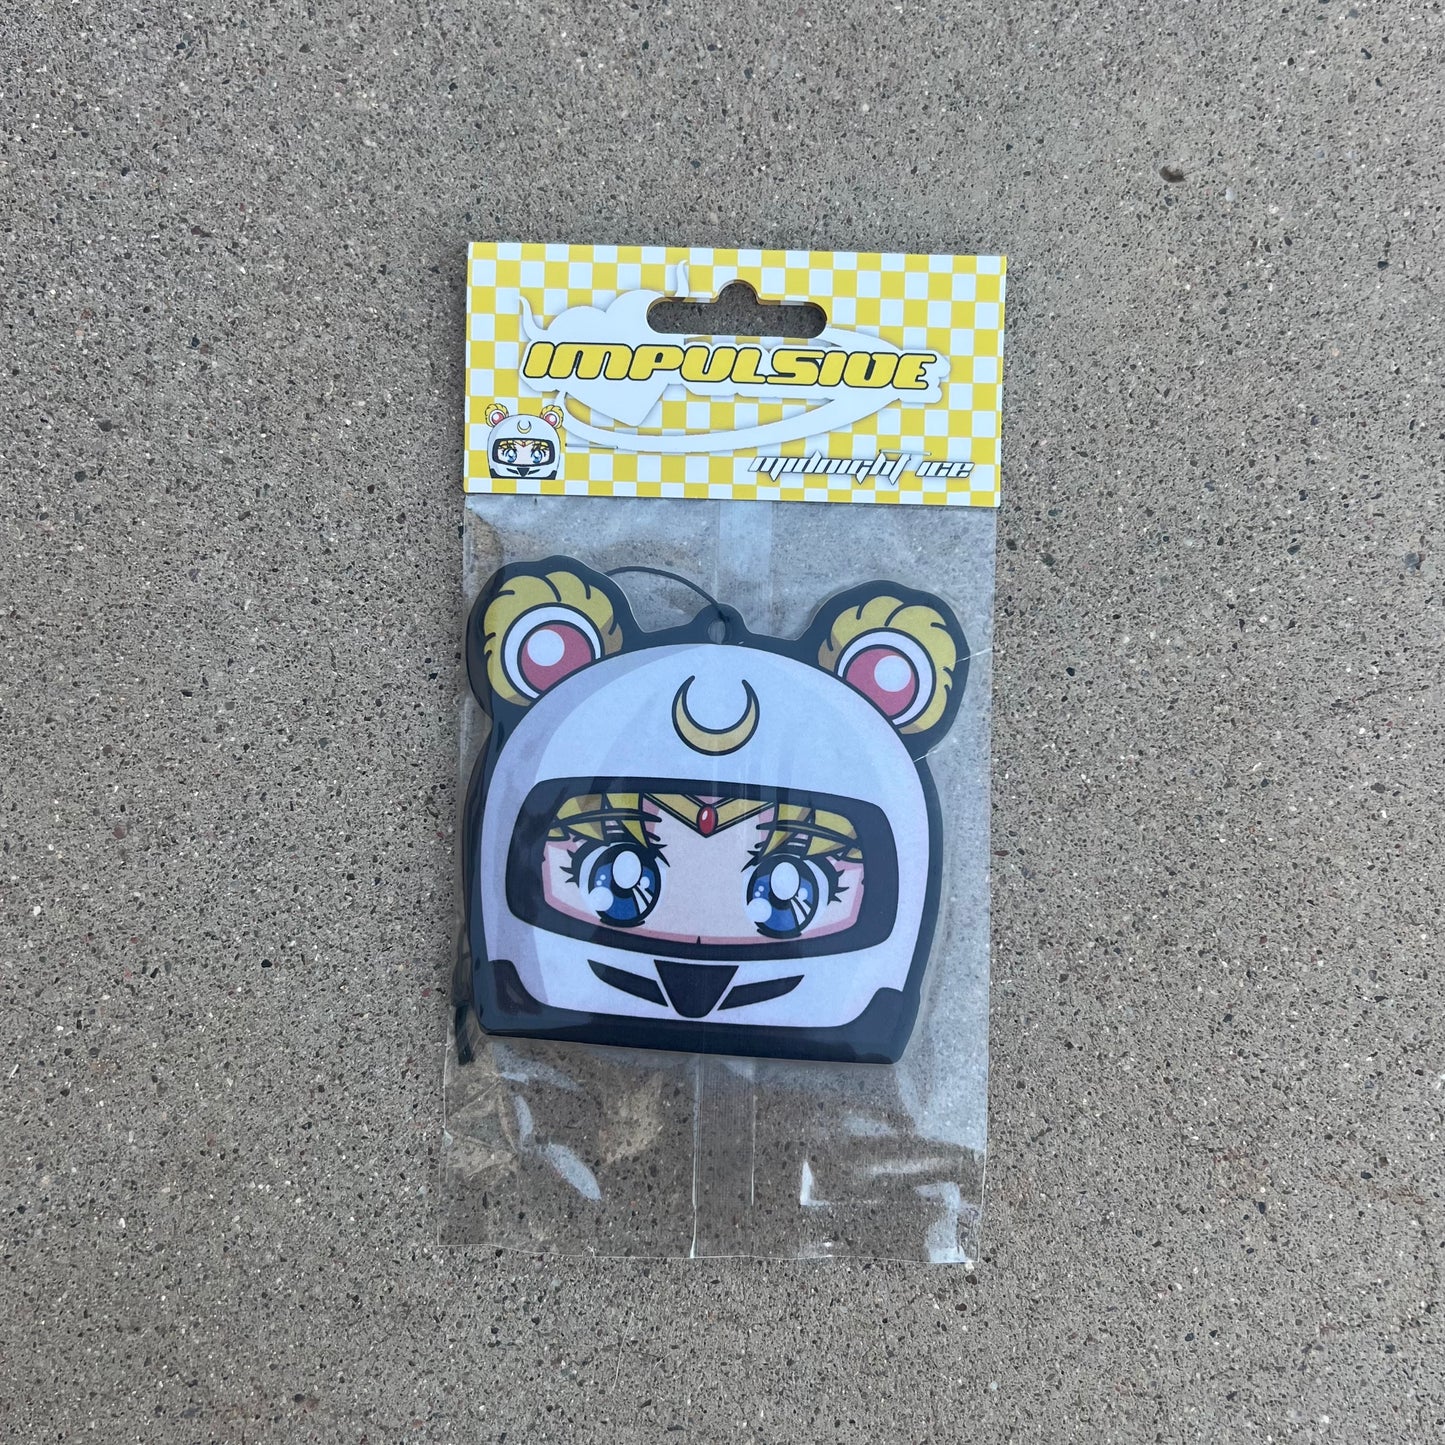 Moon Japanese Anime Character air freshener hanging from black string. Wearing white helmet with yellow moon crescent logo on blue eyed anime girl. blonde spacebuns. white and yellow checkered background with white y2k impulsive logo midnight ice scent label cardboard head card.